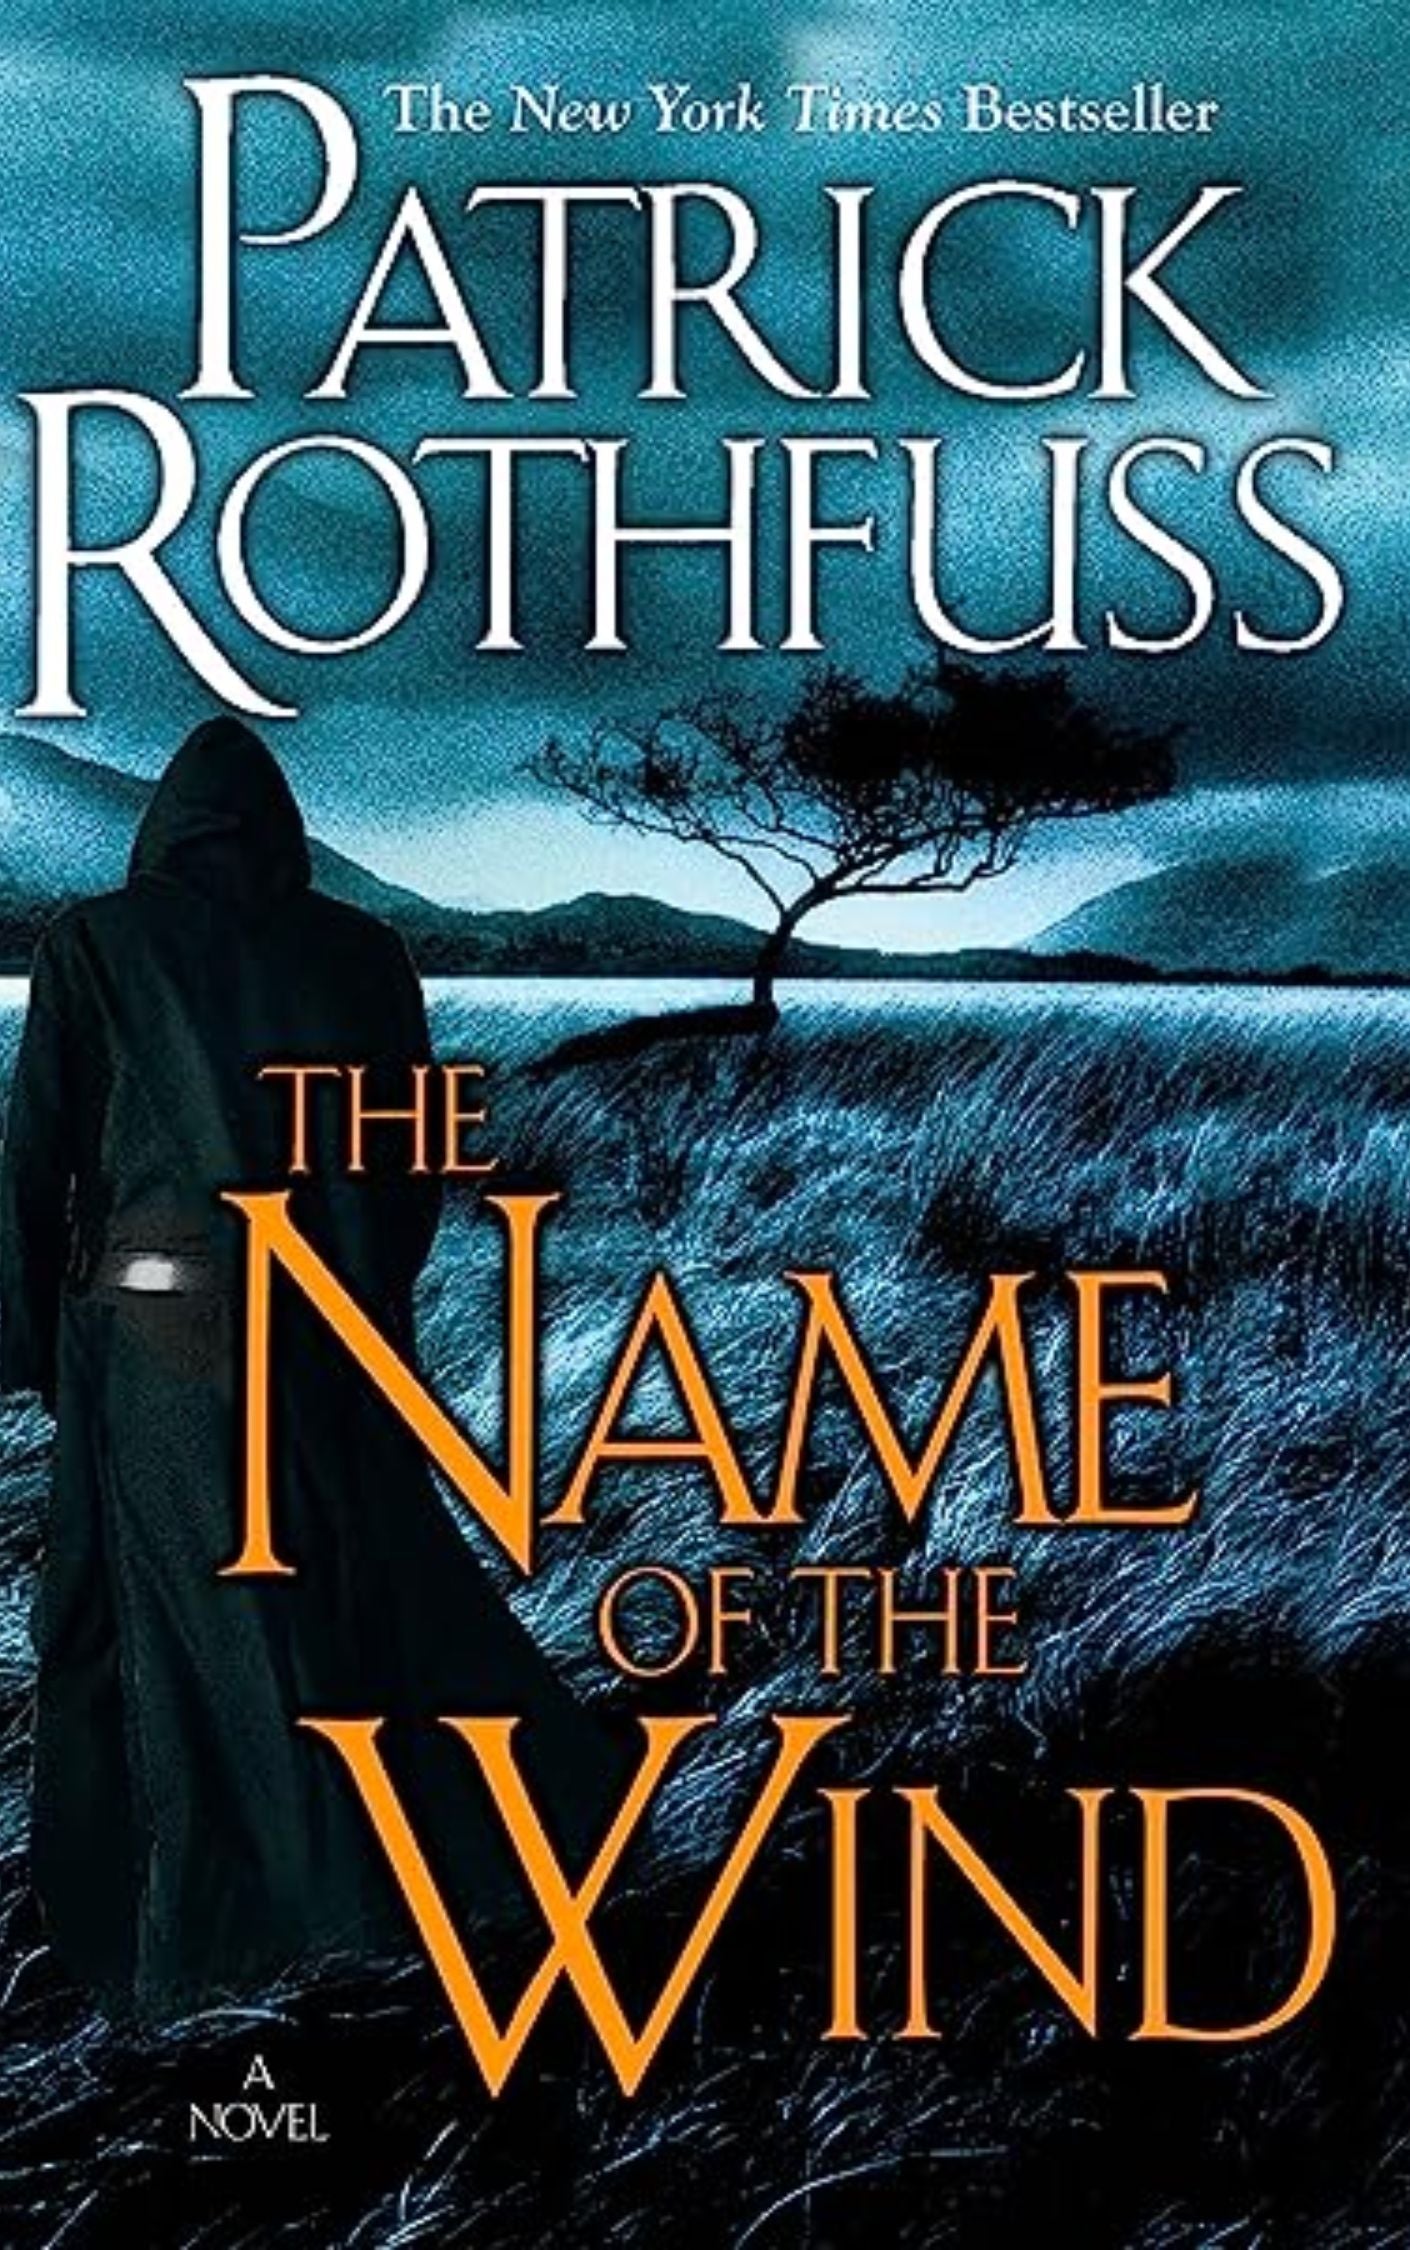 "The Name of the Wind" by Patrick Rothfuss: Books For Women